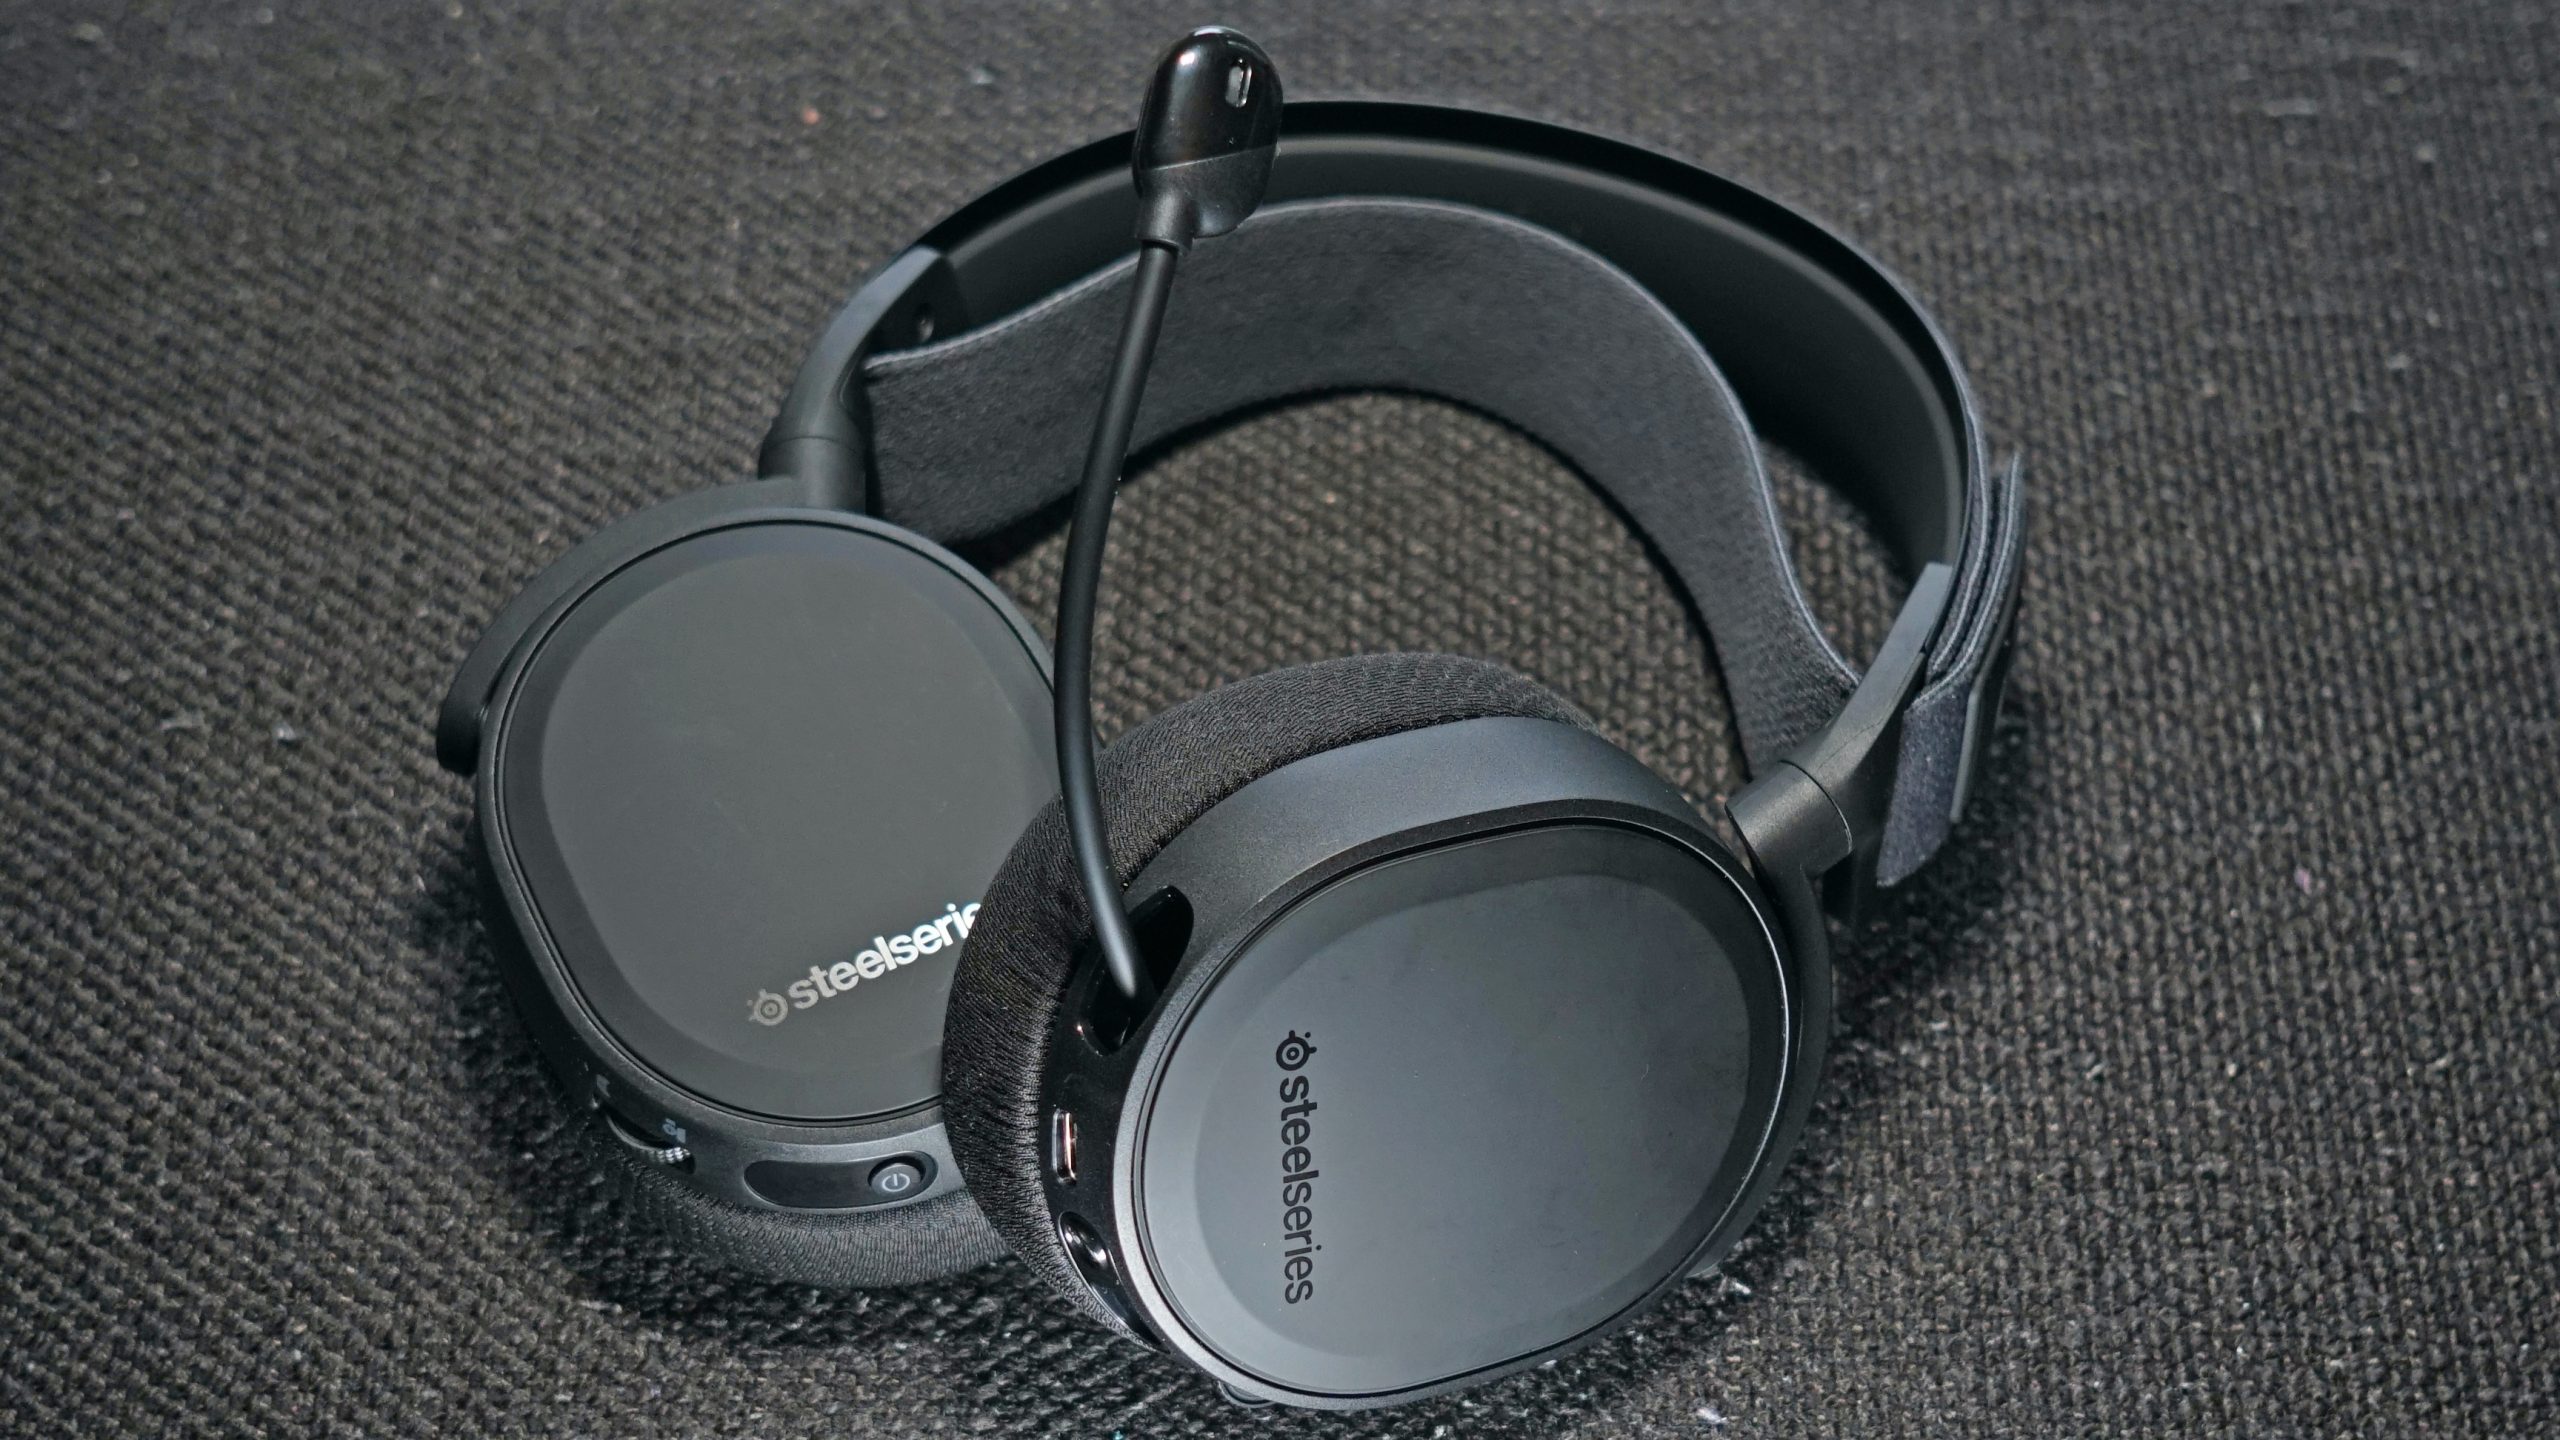 The SteelSeries Arctis 7+ lays on a fabric surface with its retractable microphone extended and